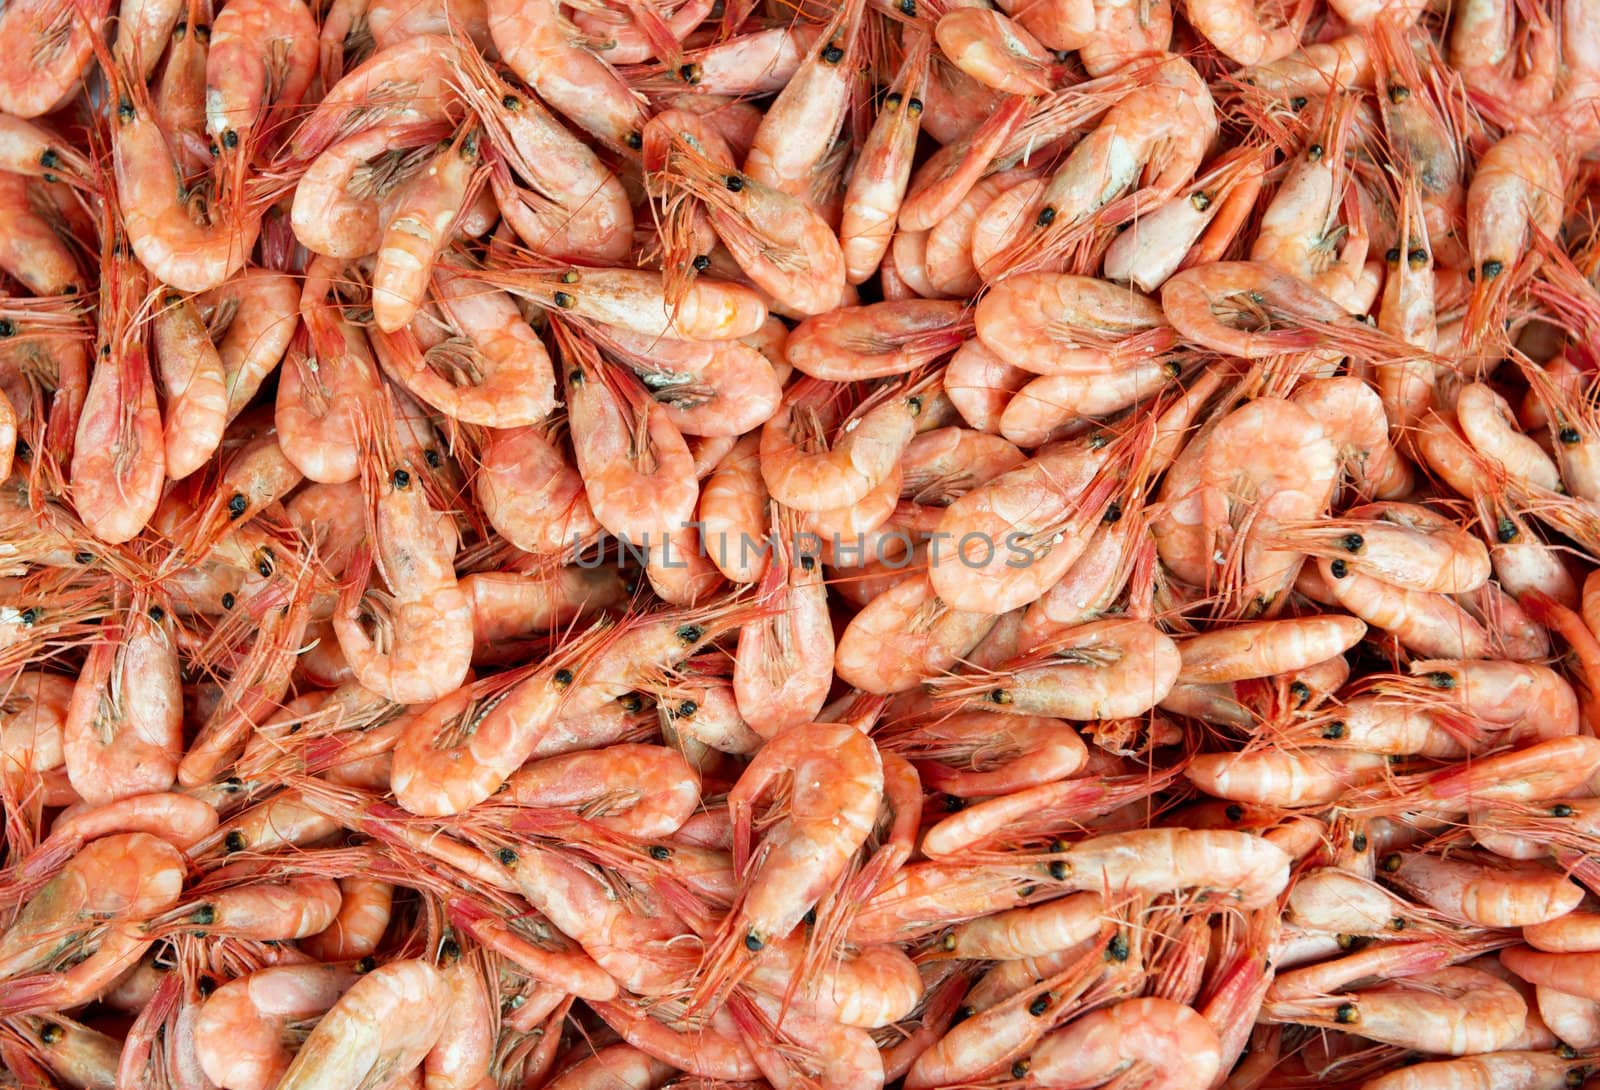 Bunch of shrimps ready to eat